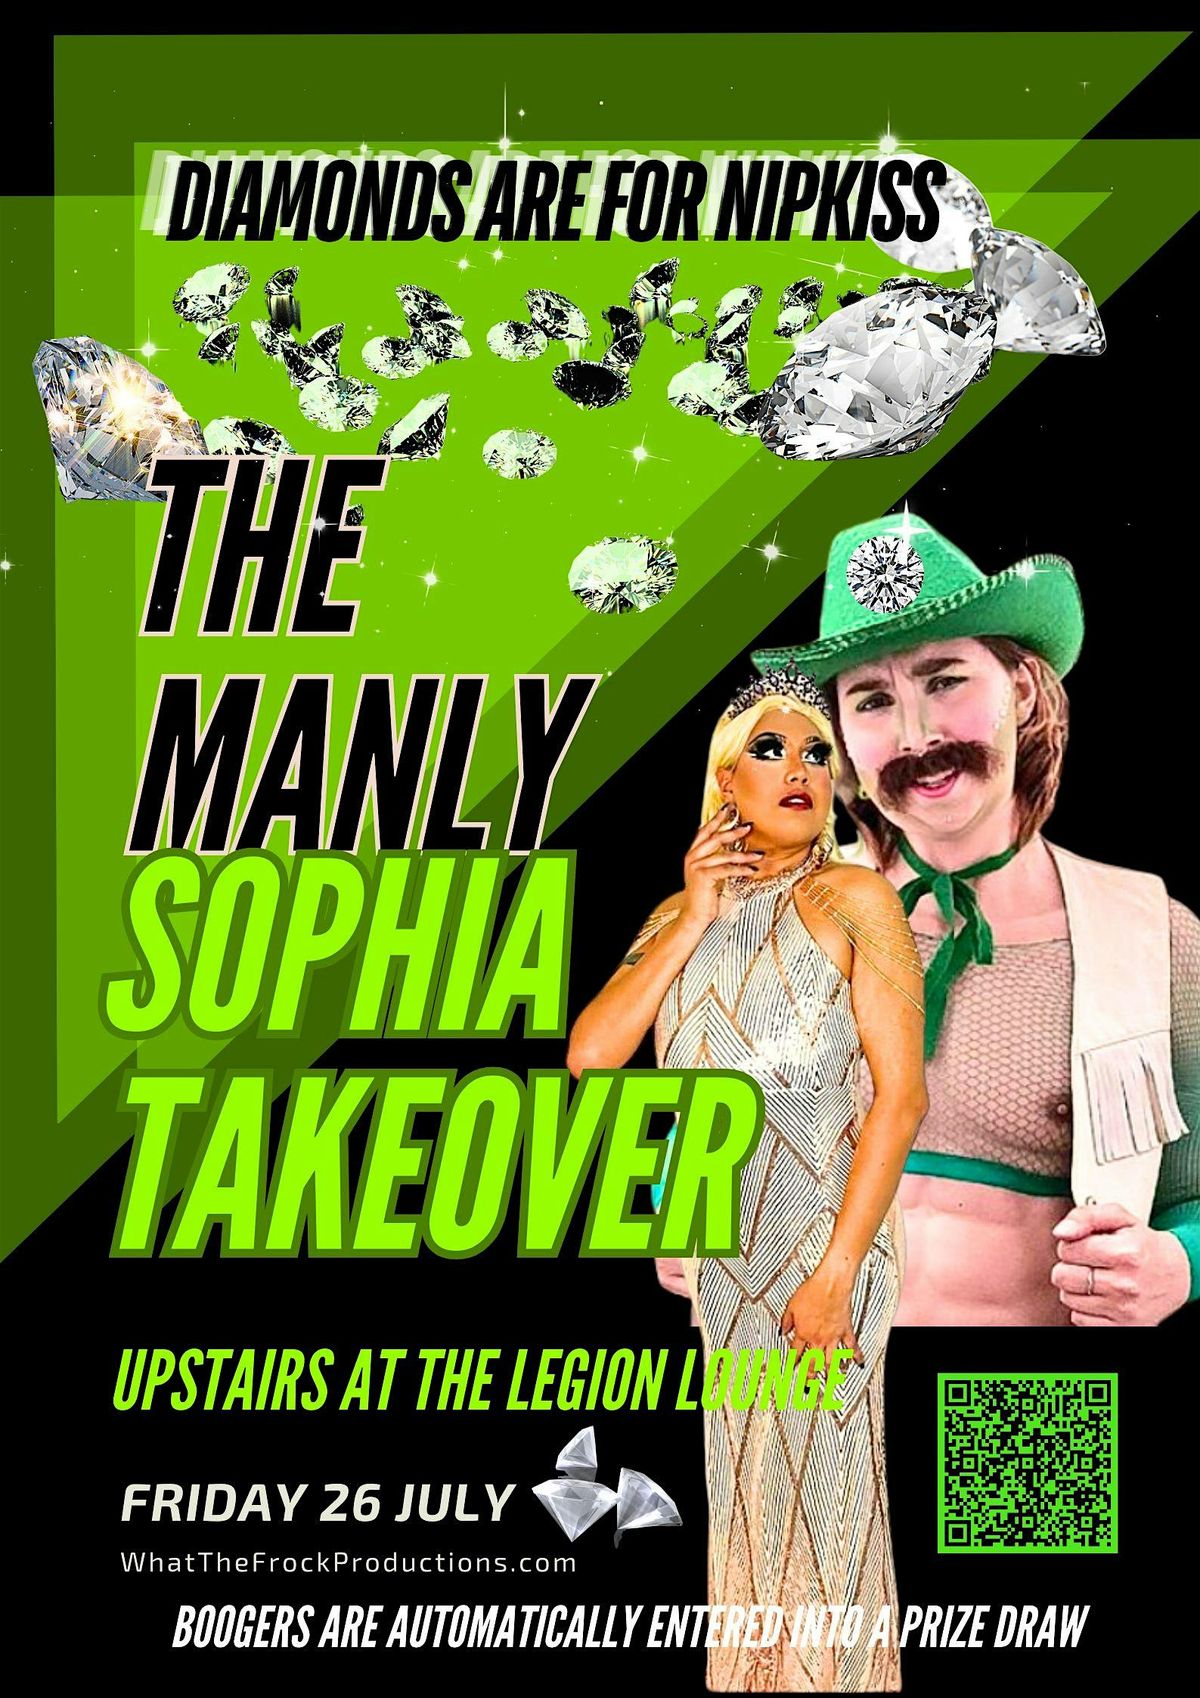 The Manly Sophia Takeover - Diamonds are for Nipkiss